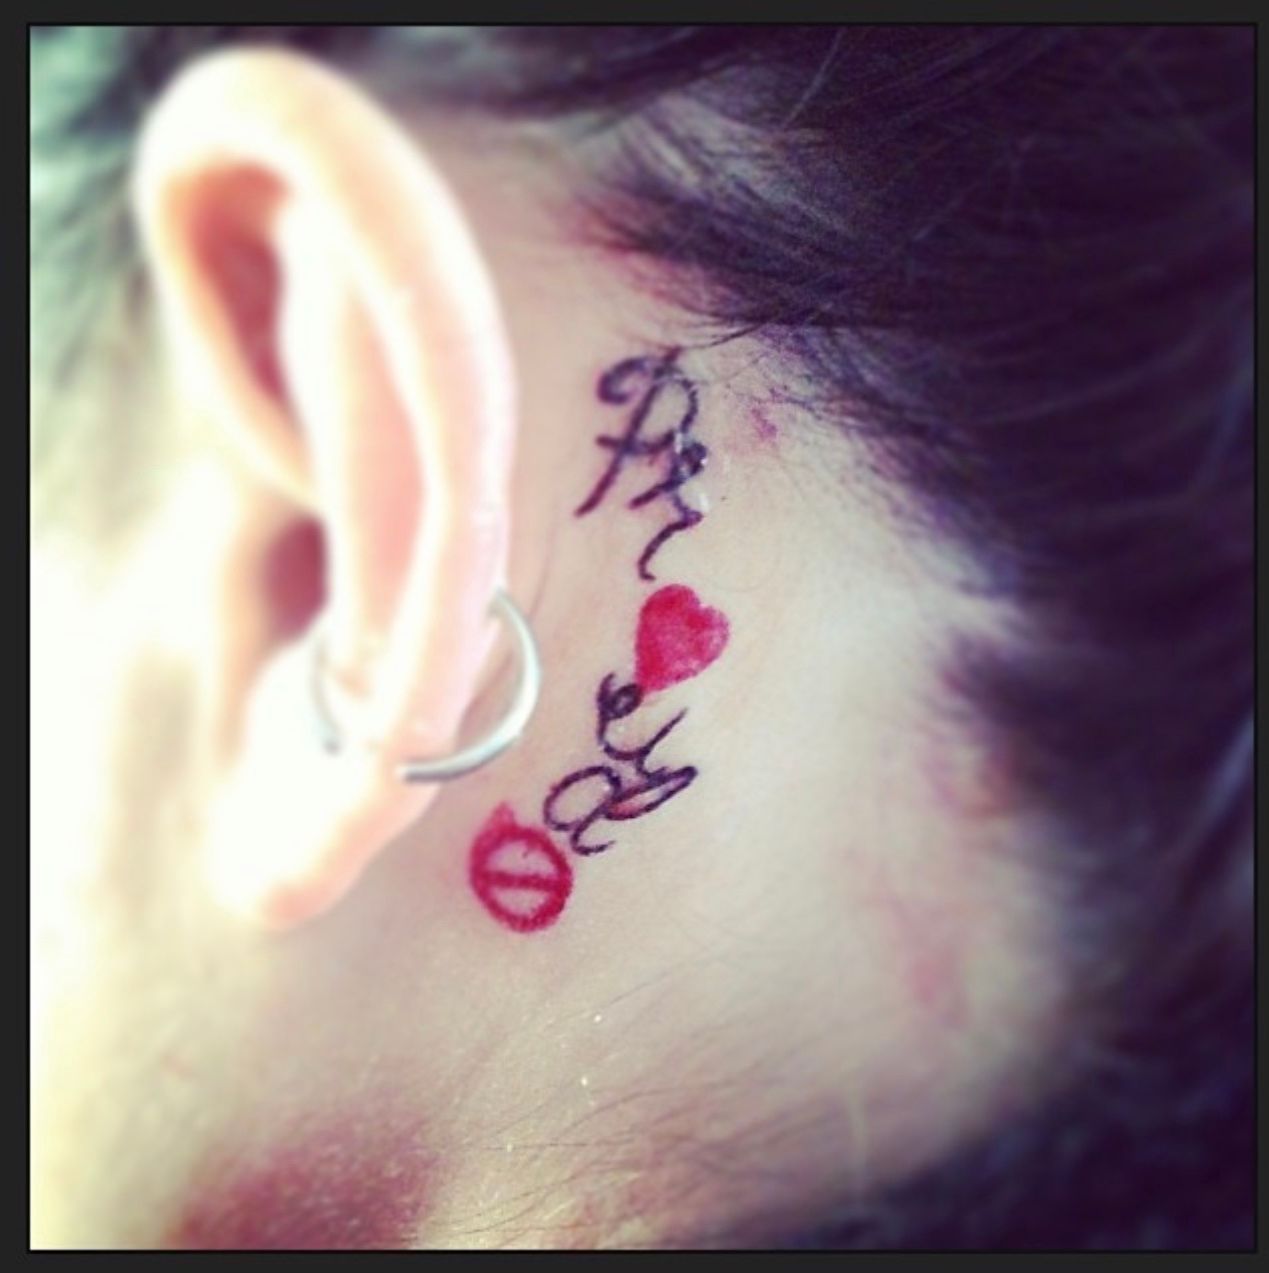 Spotted this tattoohe is a child of deaf parents hearinglossawareness  hearingloss hearing audiology audiologist  Instagram